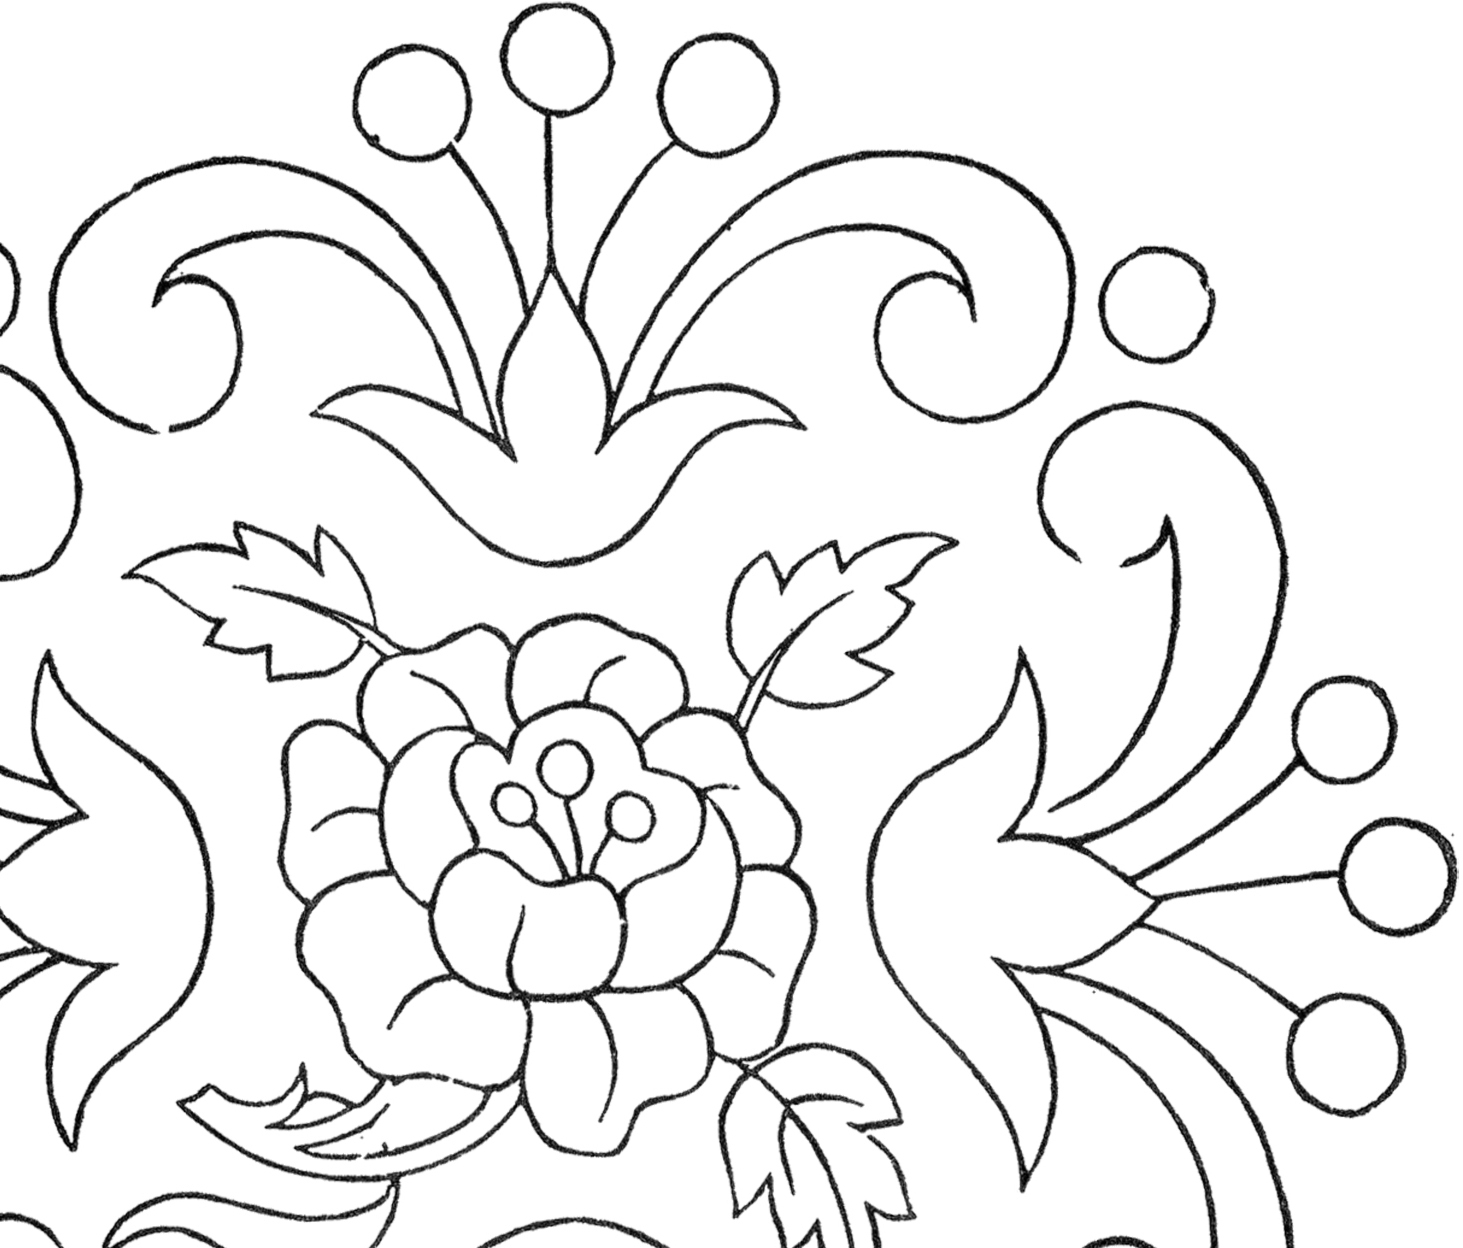 Printable Embroidery Patterns Vintage Floral Embroidery Pattern The Graphics Fairy